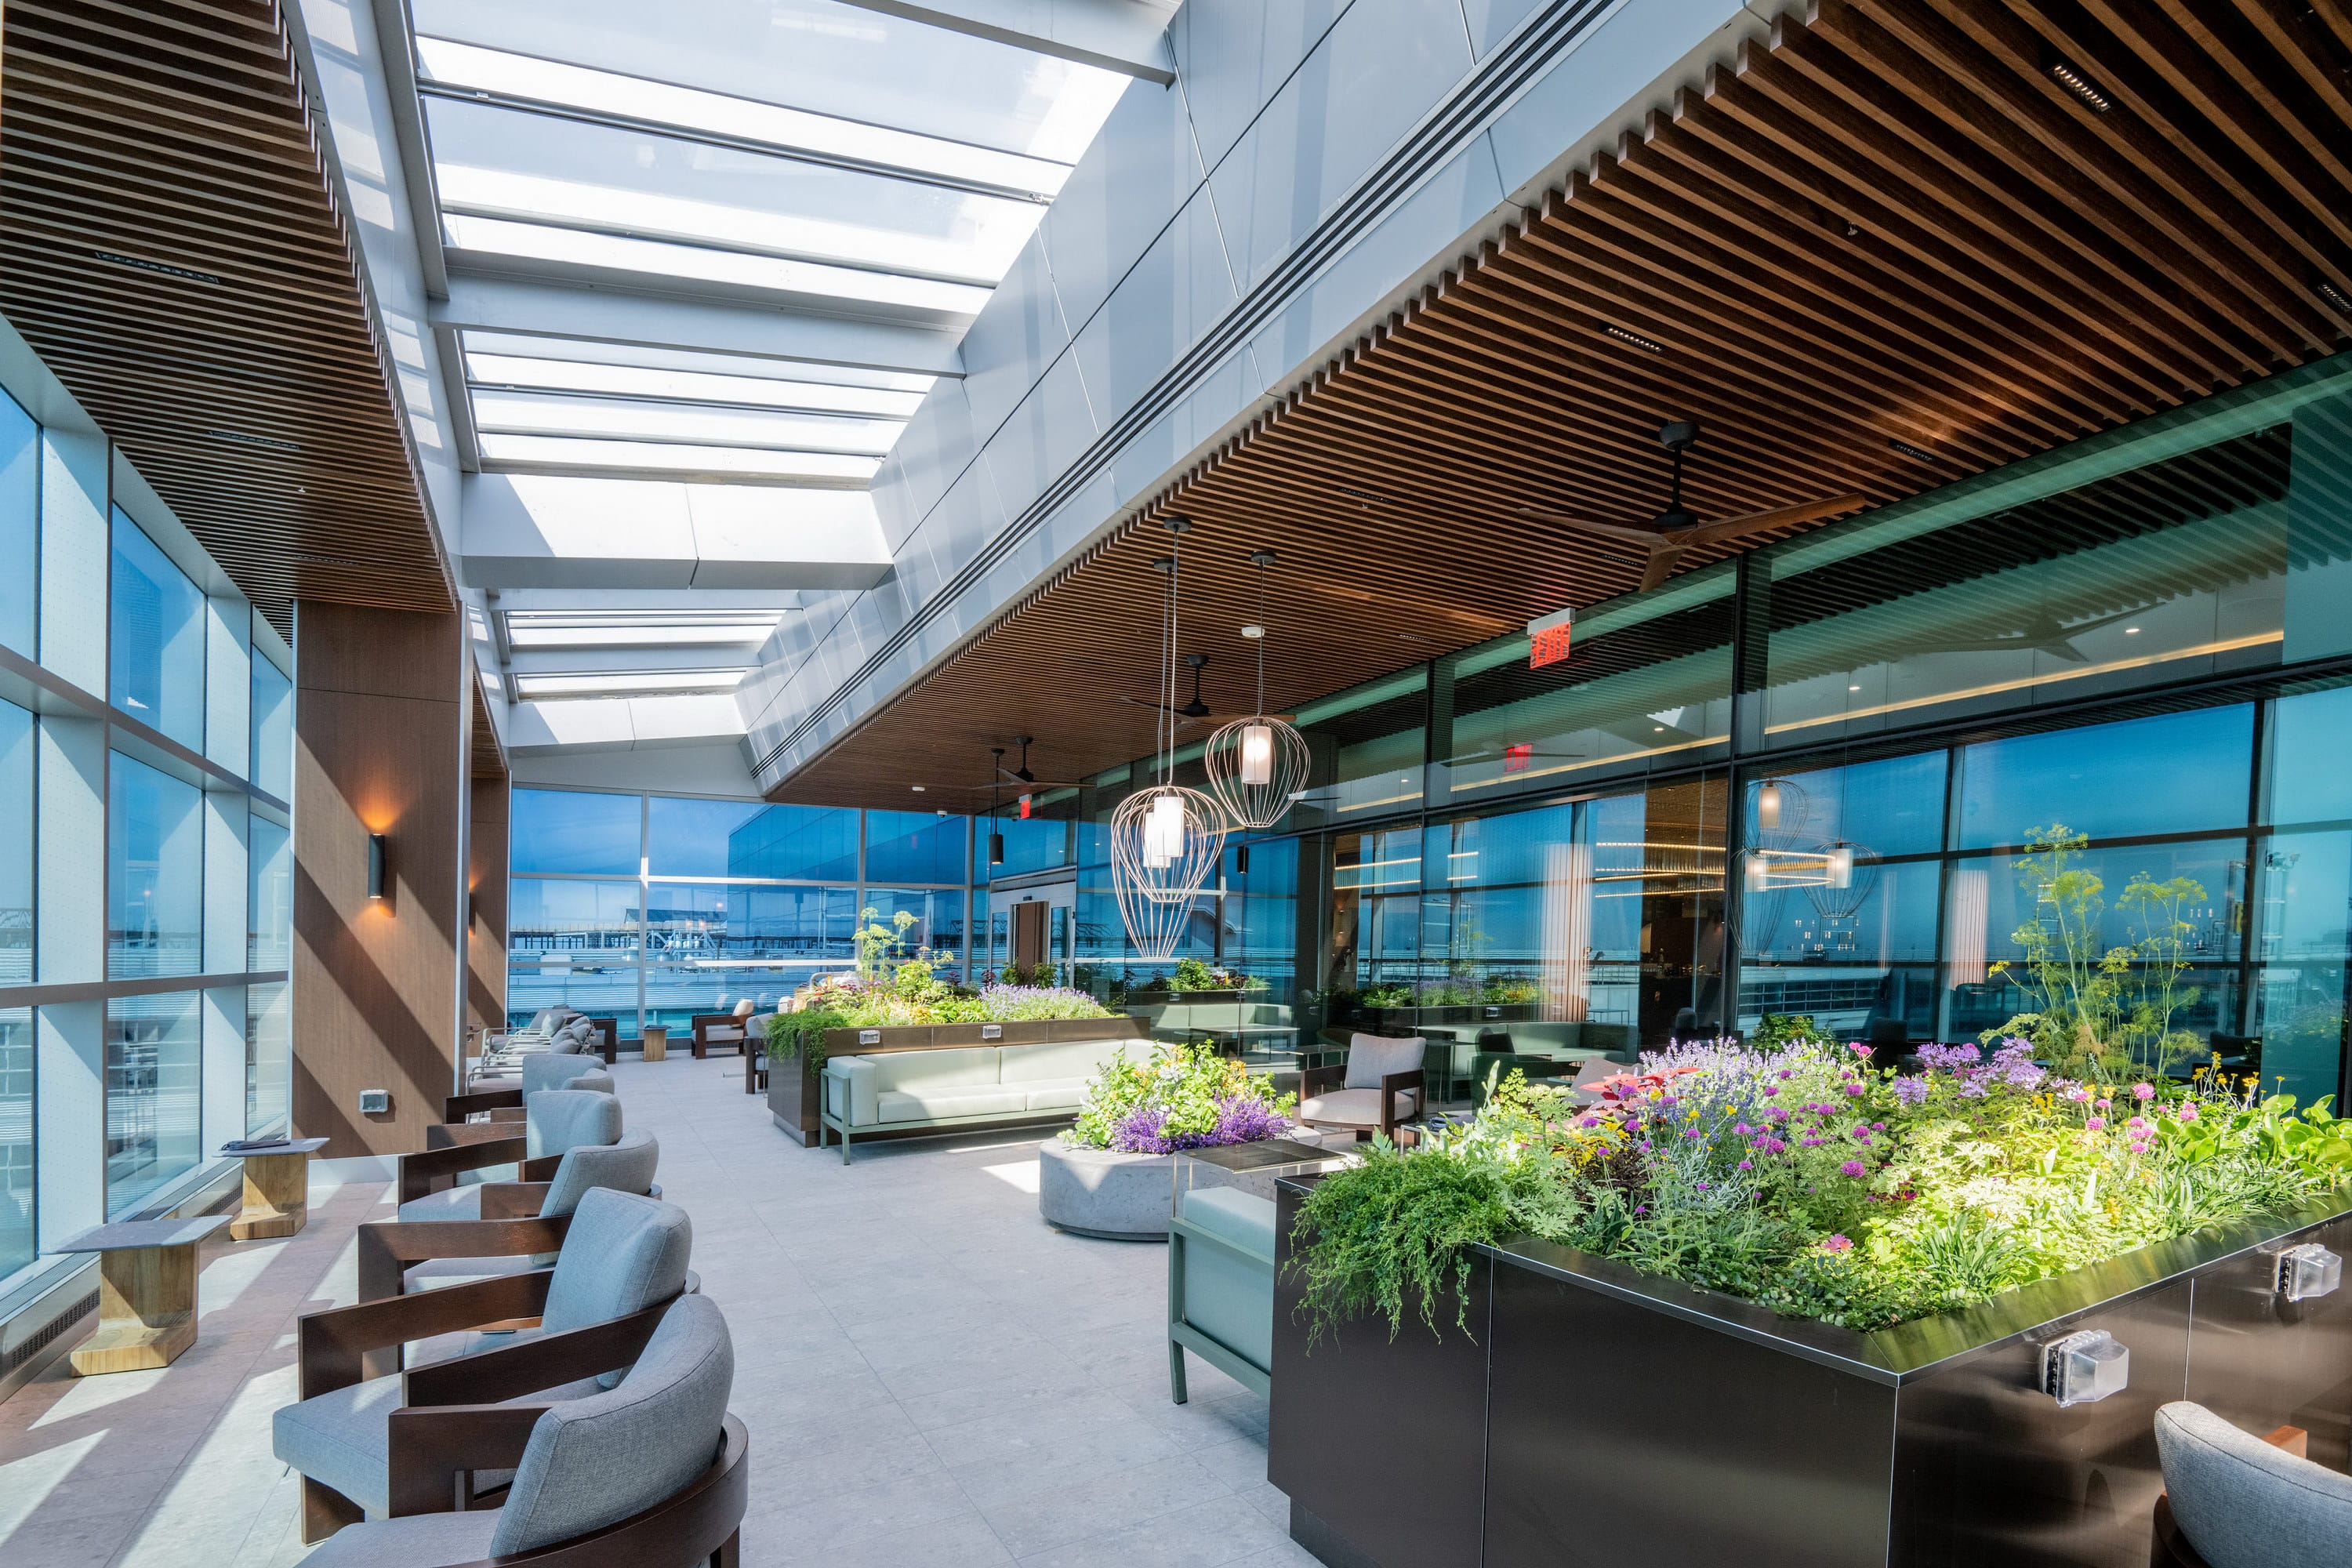 The beautiful year-round open-air terrace at the Delta One Lounge JFK is a pleasant space to work or relax.